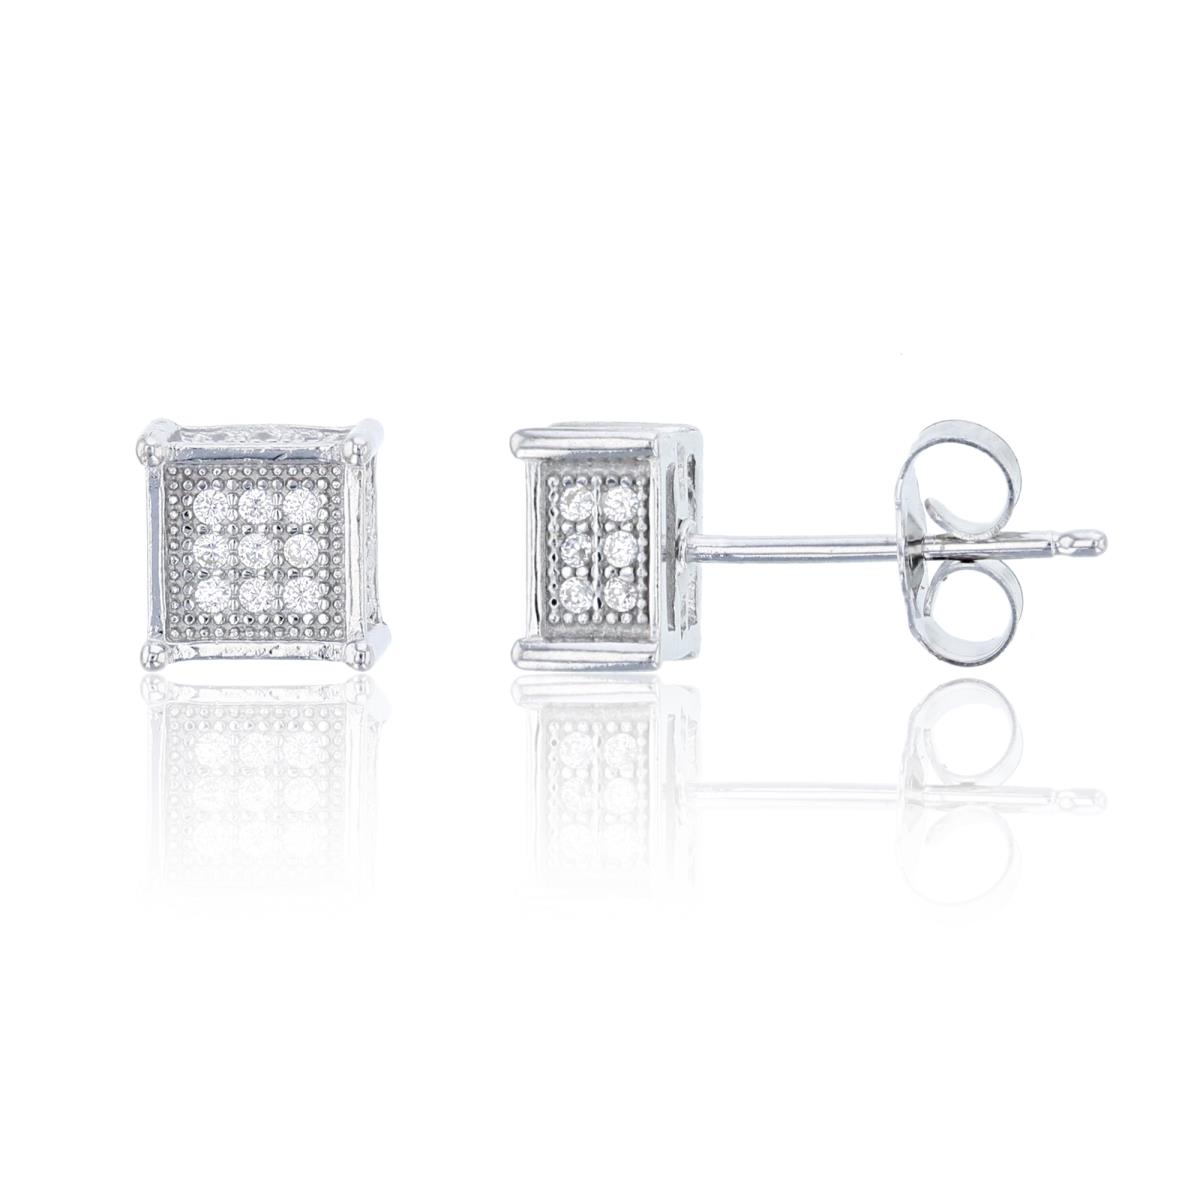 Sterling Silver 3x3 Micropave 3D Square Stud